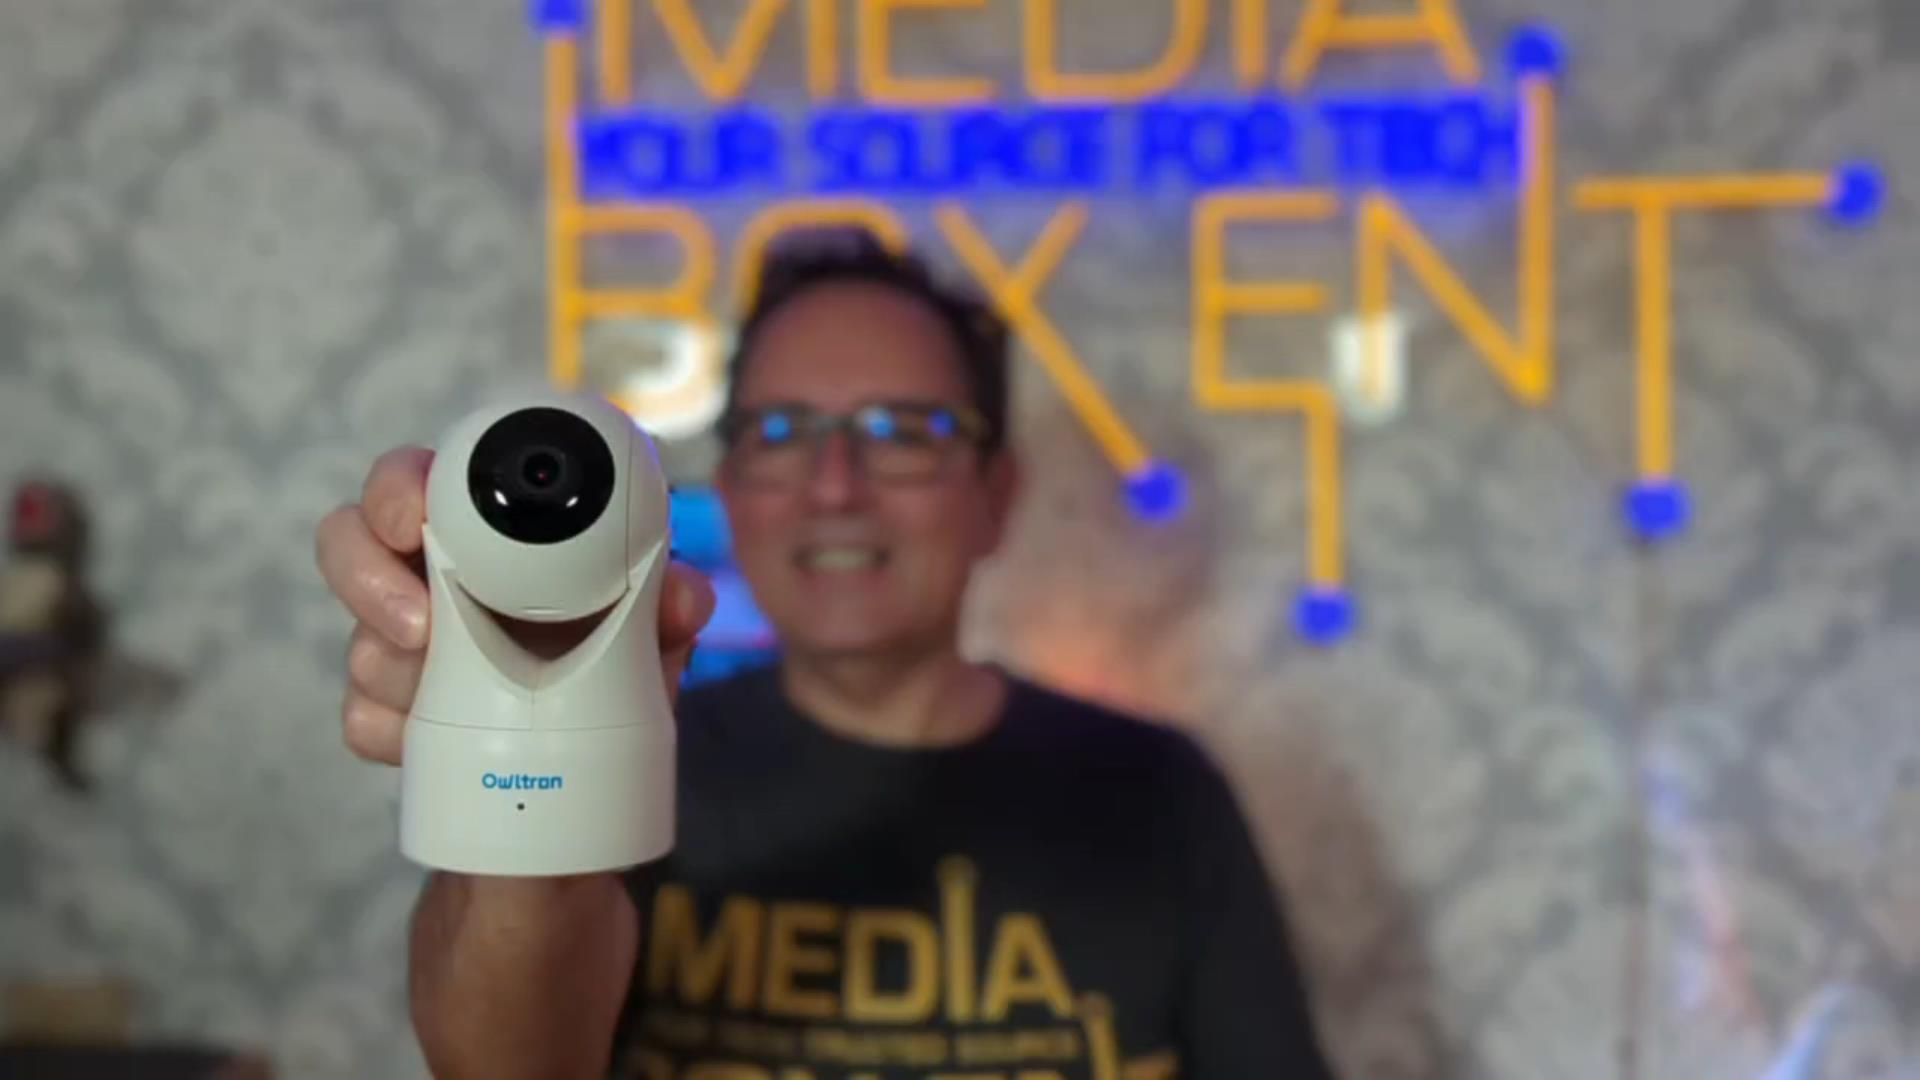 Dario, from MediaBoxEnt, holding the owltron Pet Camera, with the logo